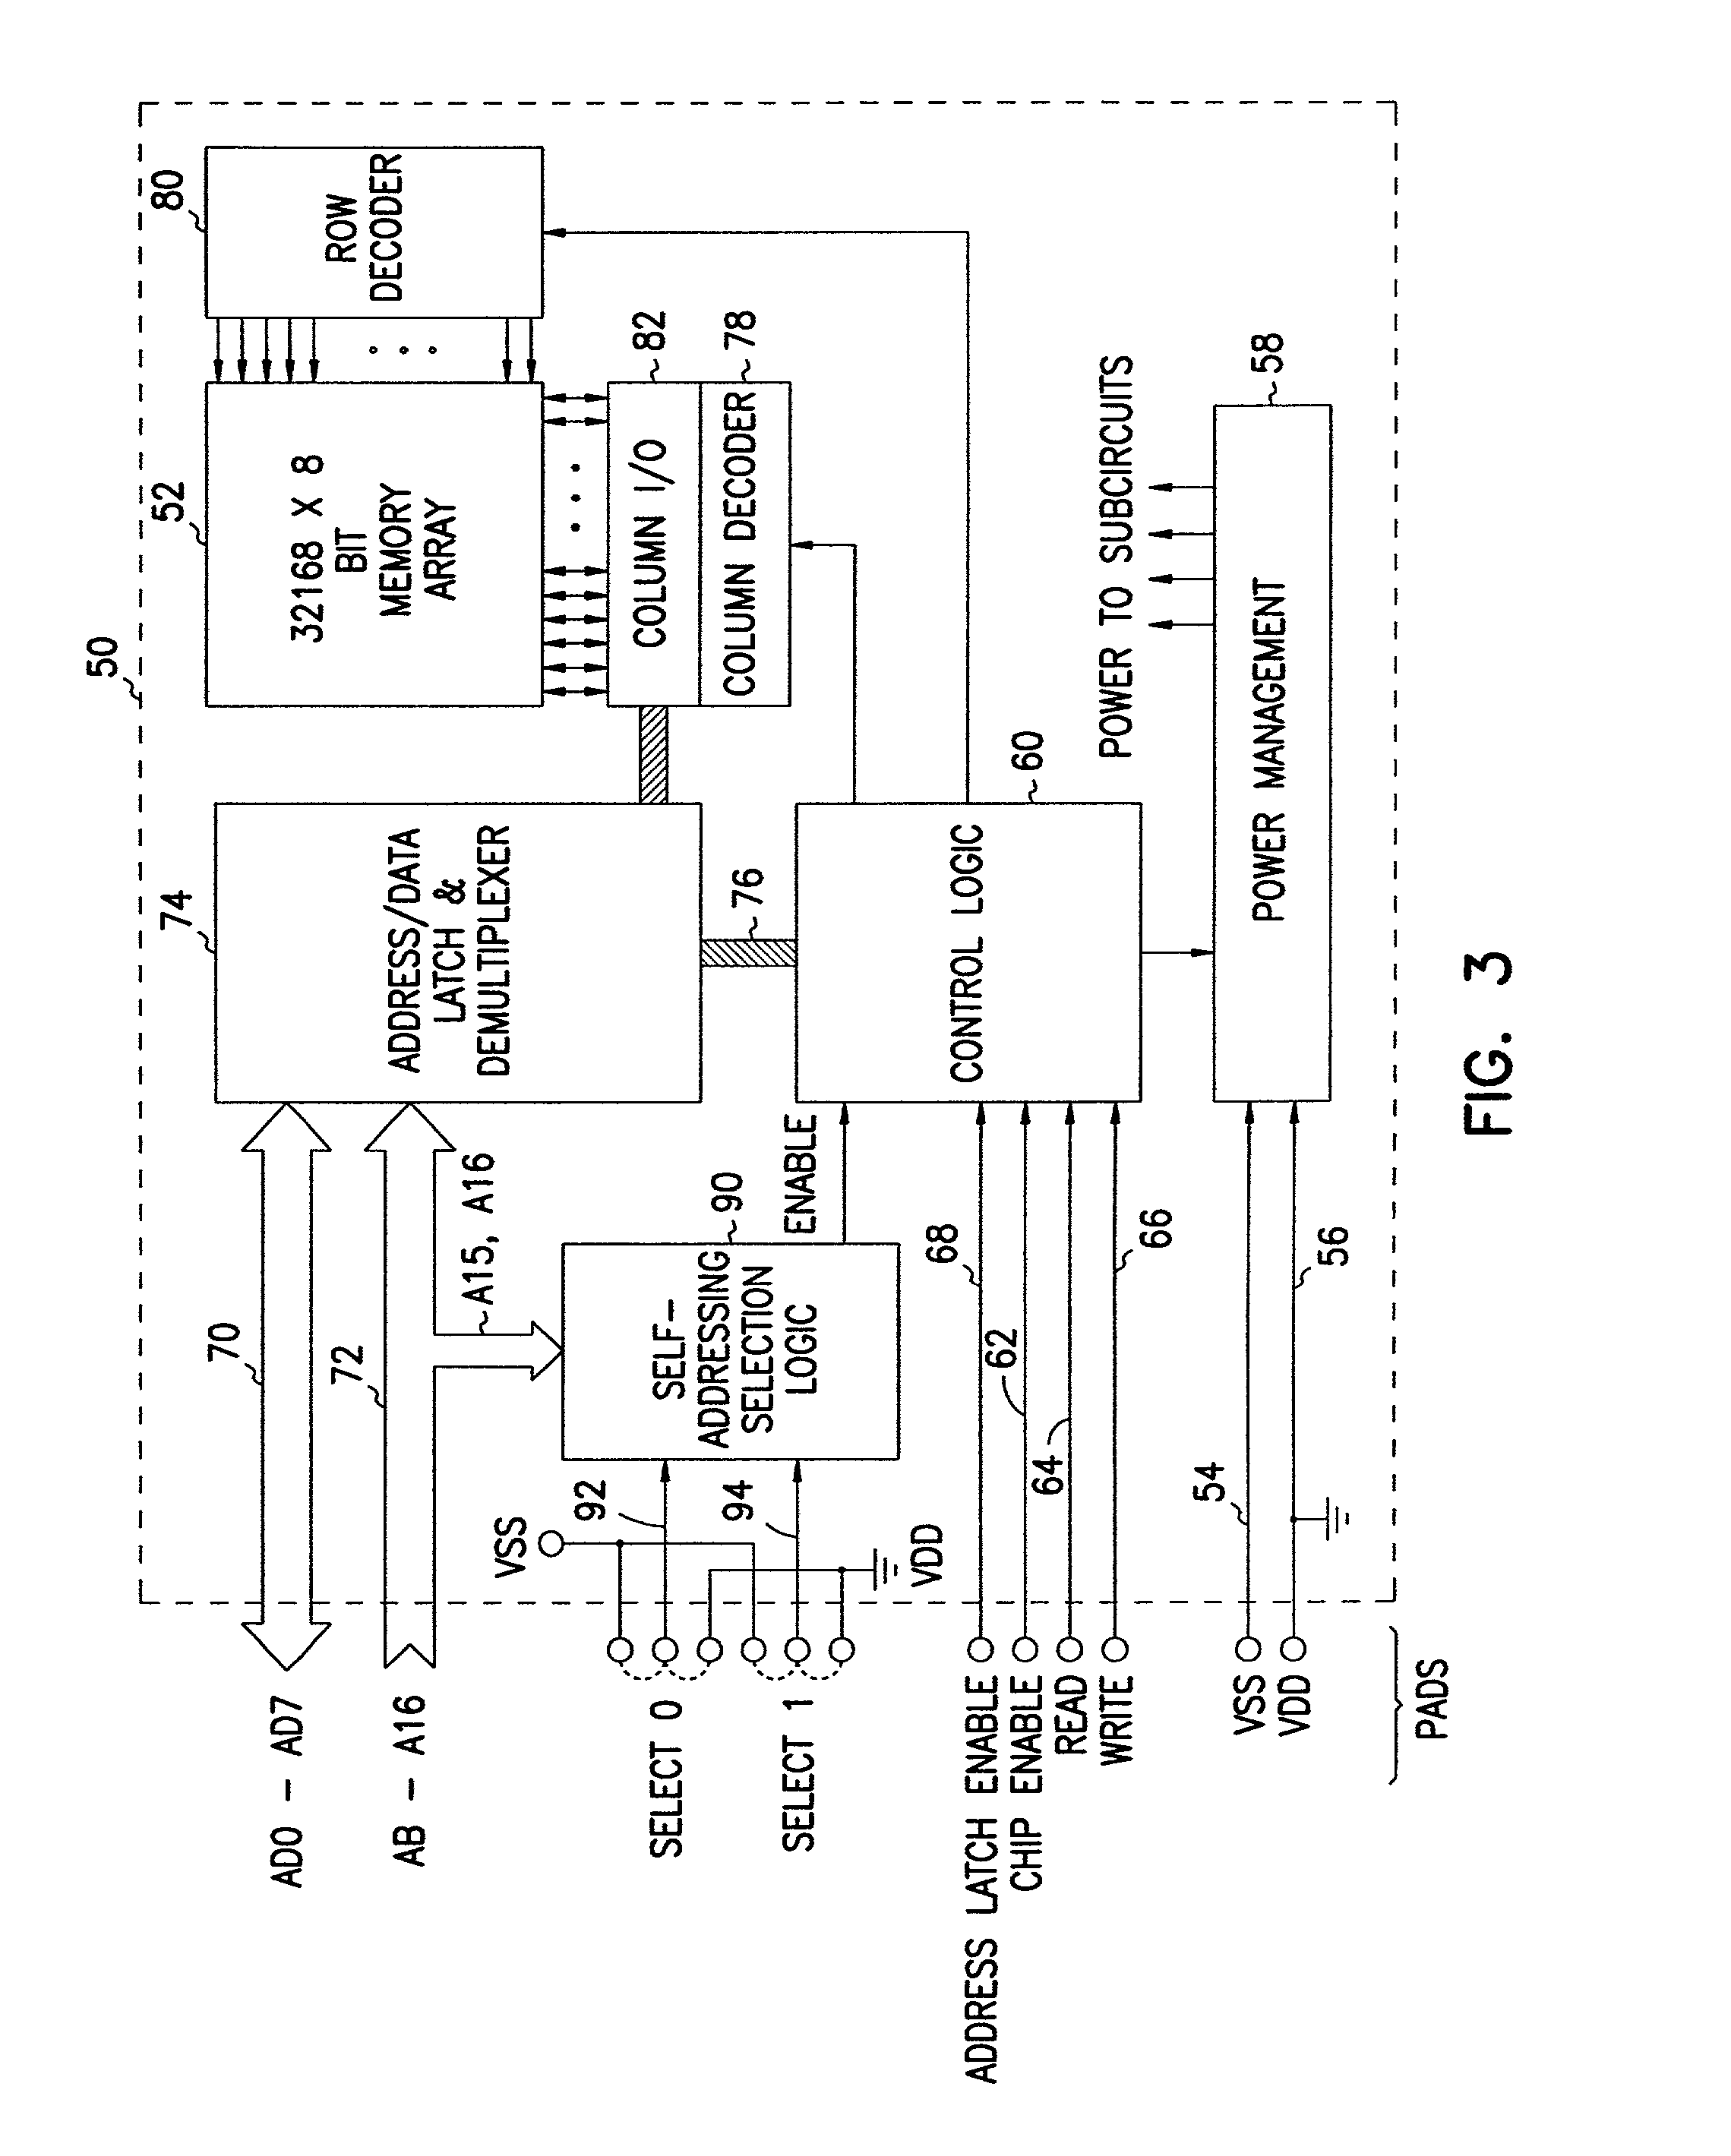 Stackable microelectronic components with self-addressing scheme